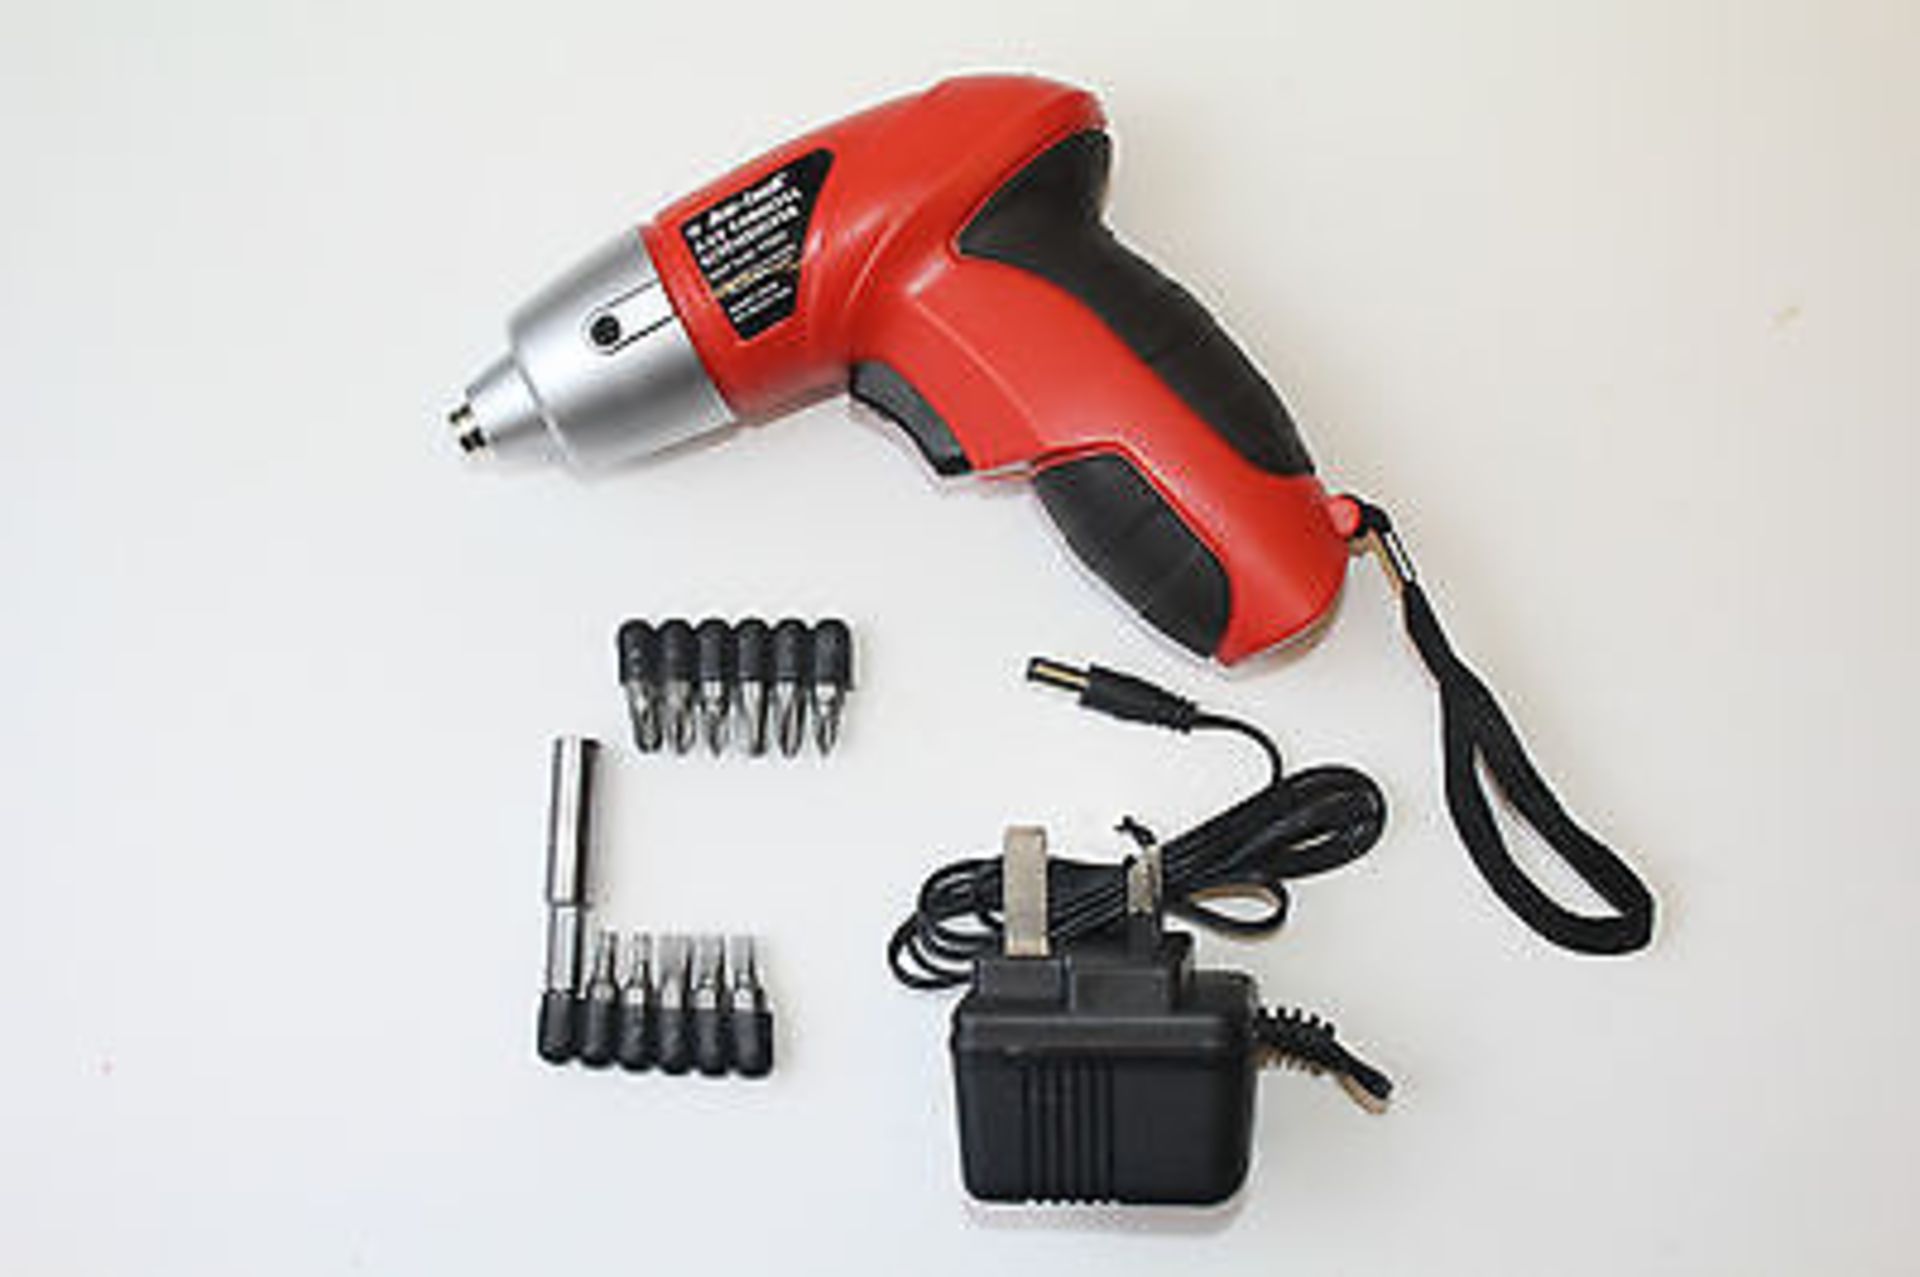 V Brand New 3.6V Cordless Screwdriver X 2 YOUR BID PRICE TO BE MULTIPLIED BY TWO